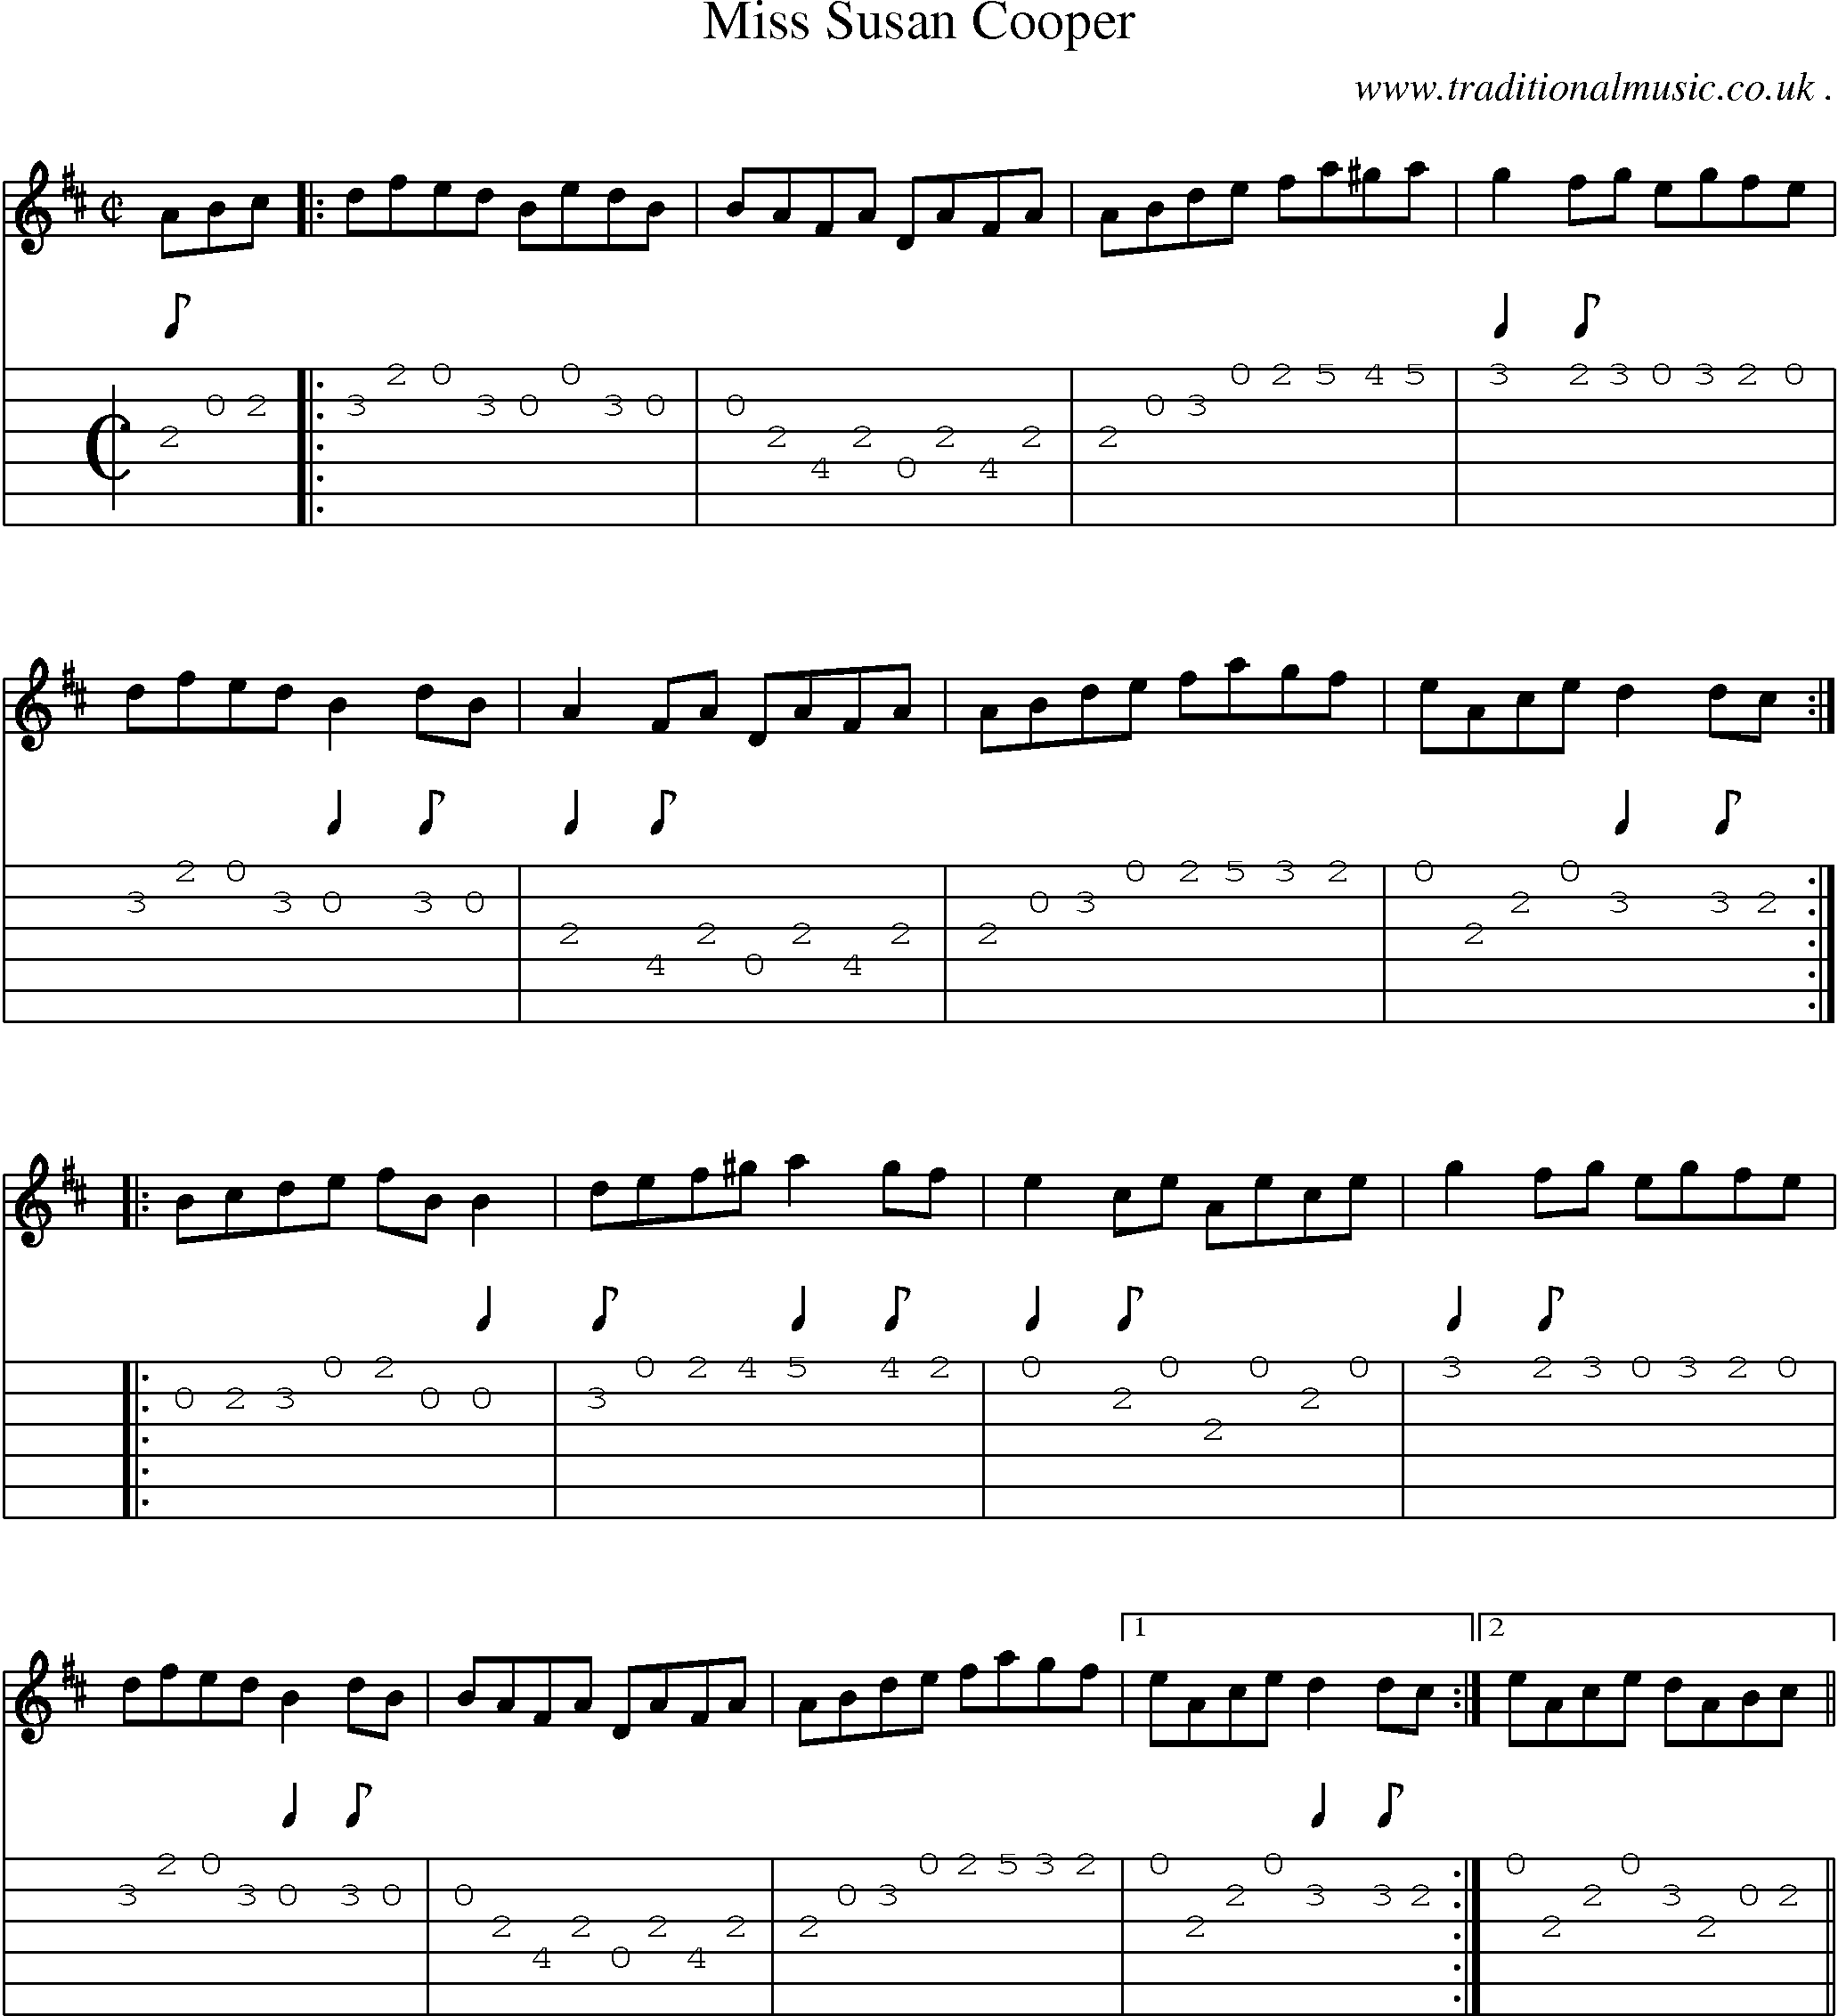 Sheet-Music and Guitar Tabs for Miss Susan Cooper